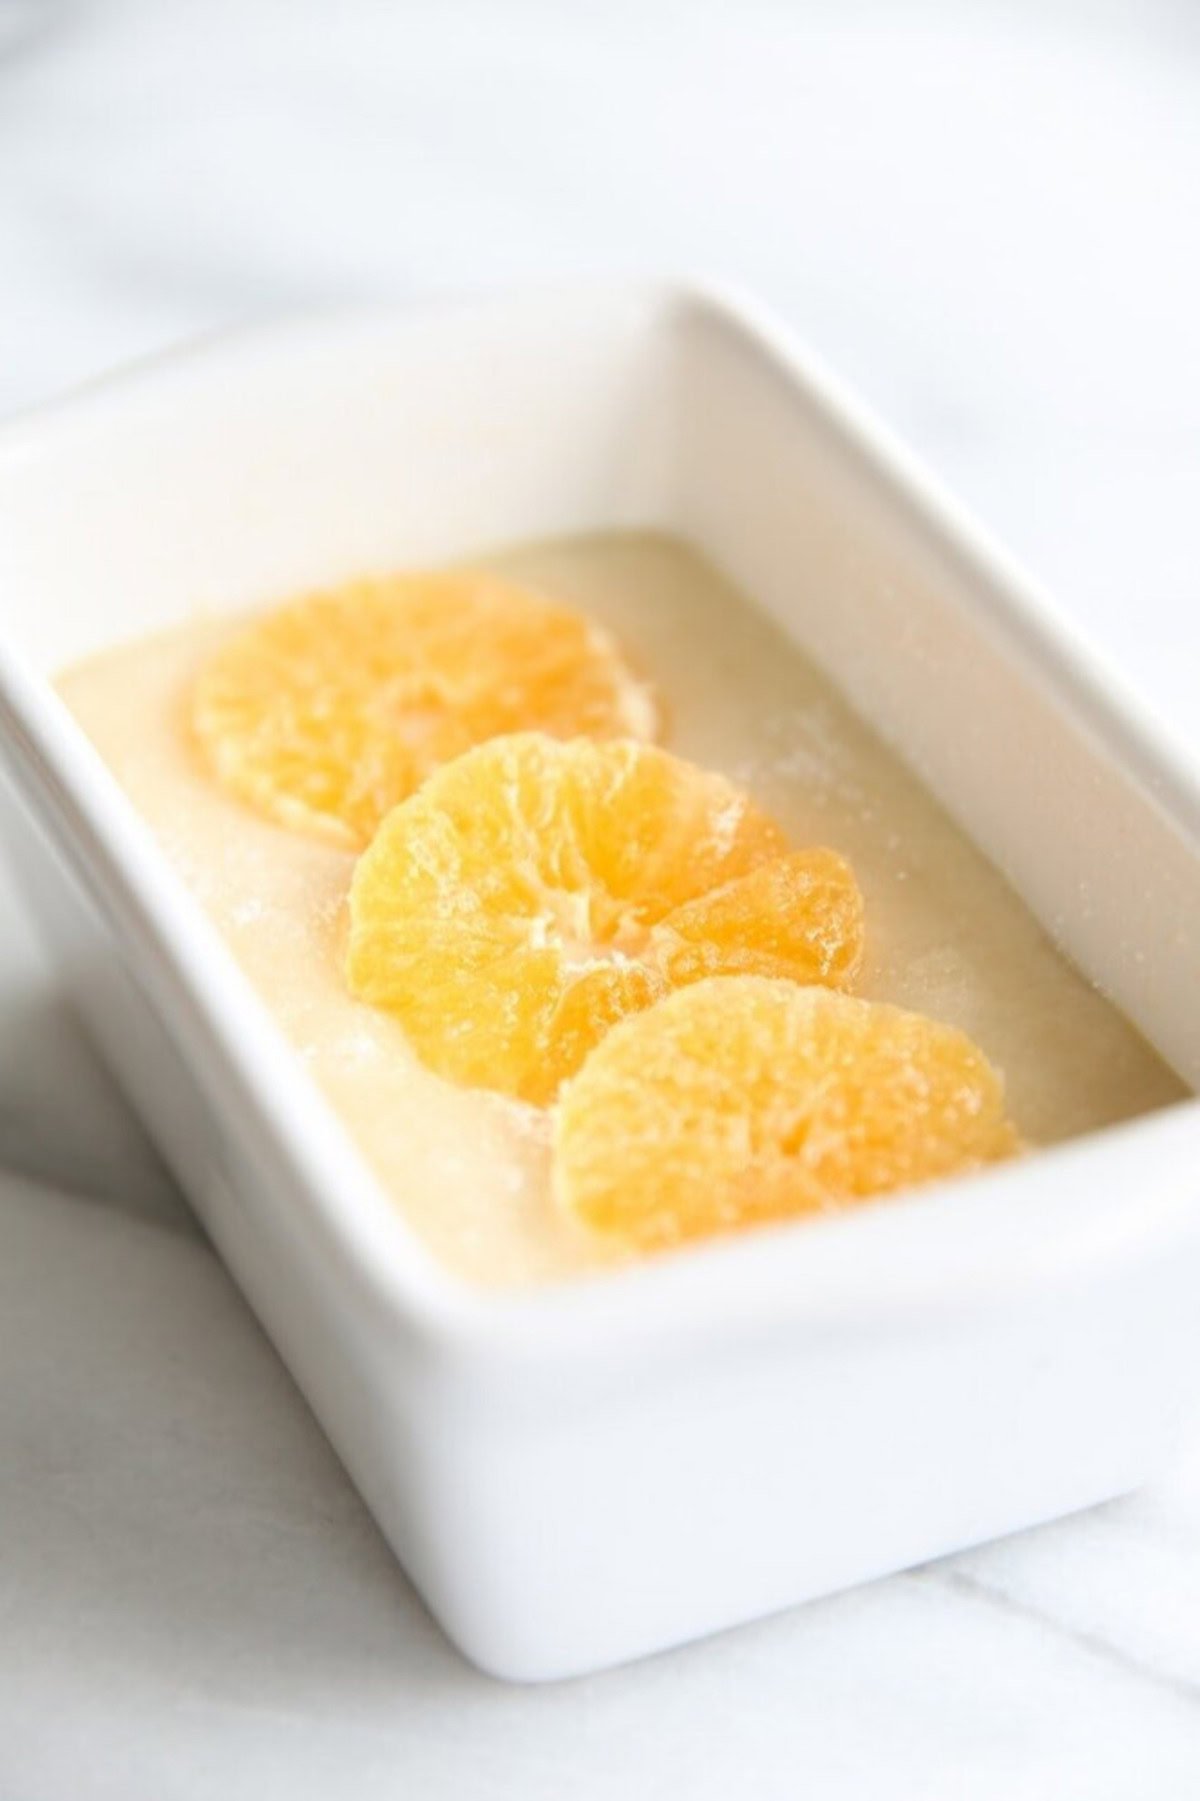 A small rectangular white dish contains a creamy dessert topped with four thin slices of orange, reminiscent of the zest in quick orange bread.